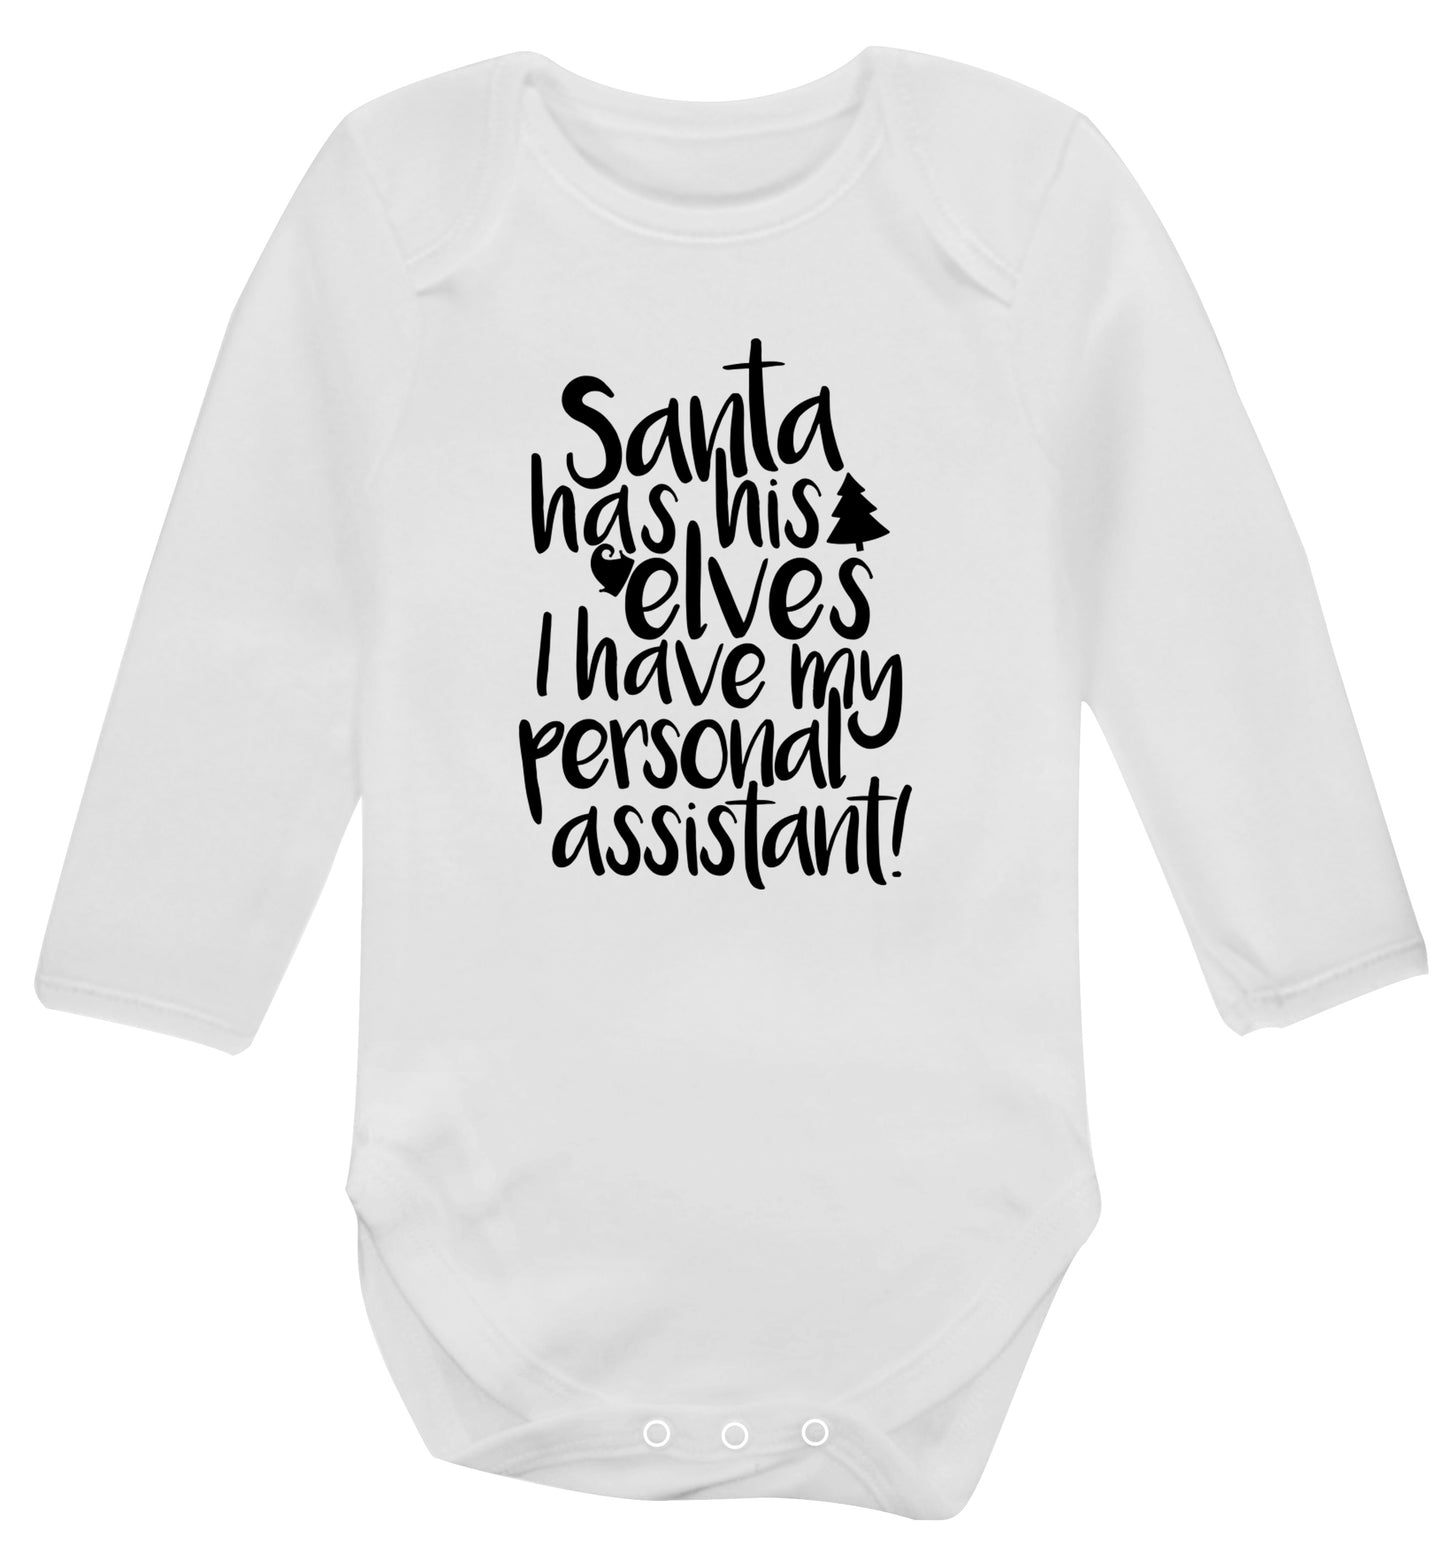 Santa has his elves I have my personal assistant Baby Vest long sleeved white 6-12 months